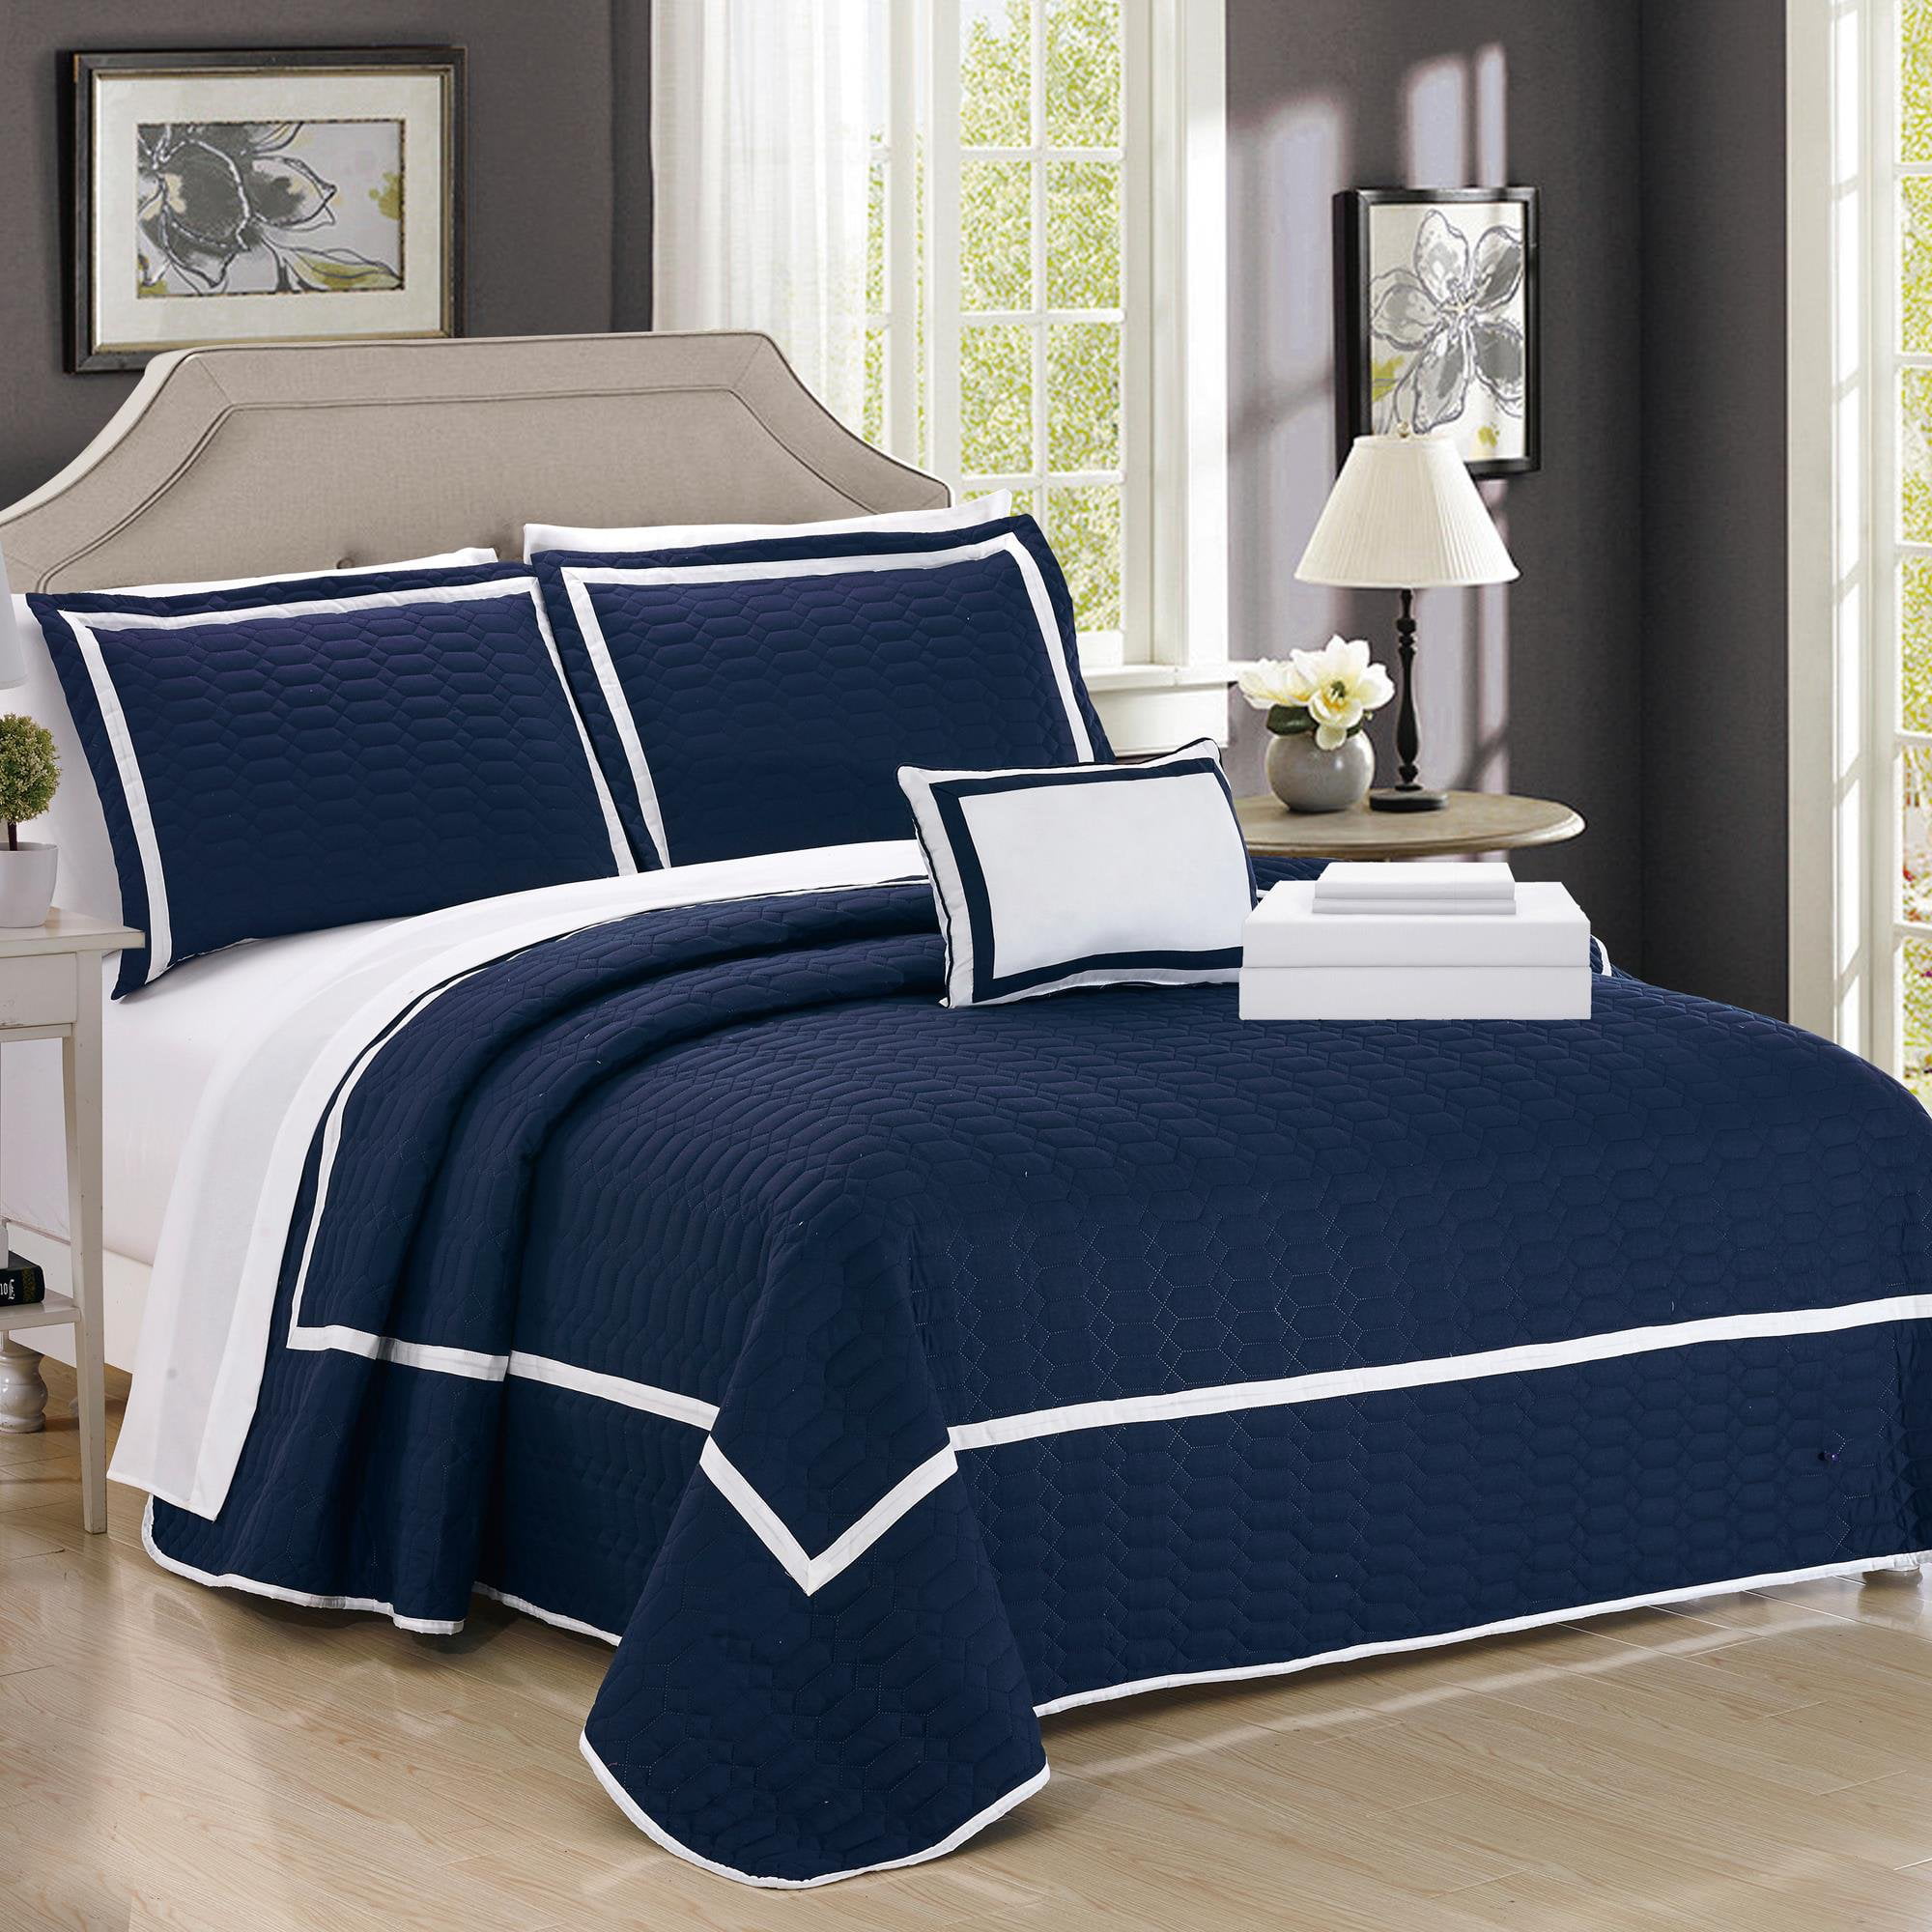 Antoine 8 Piece Quilted Bed in a Bag Sheets Decorative Pillows Shams Blue